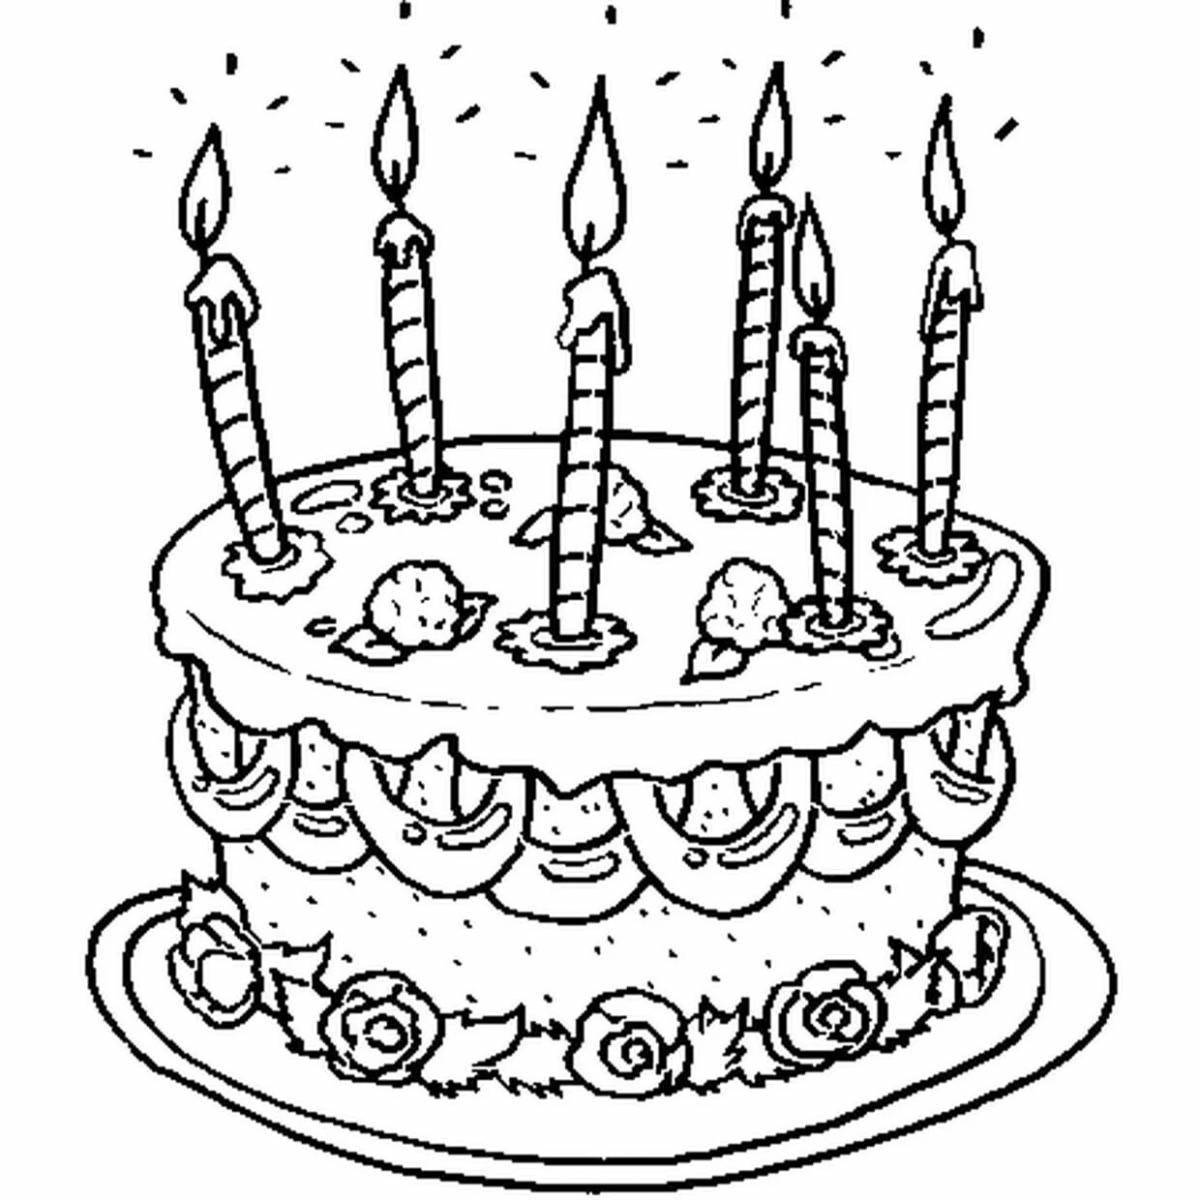 Birthday cake coloring book for 6-7 year olds